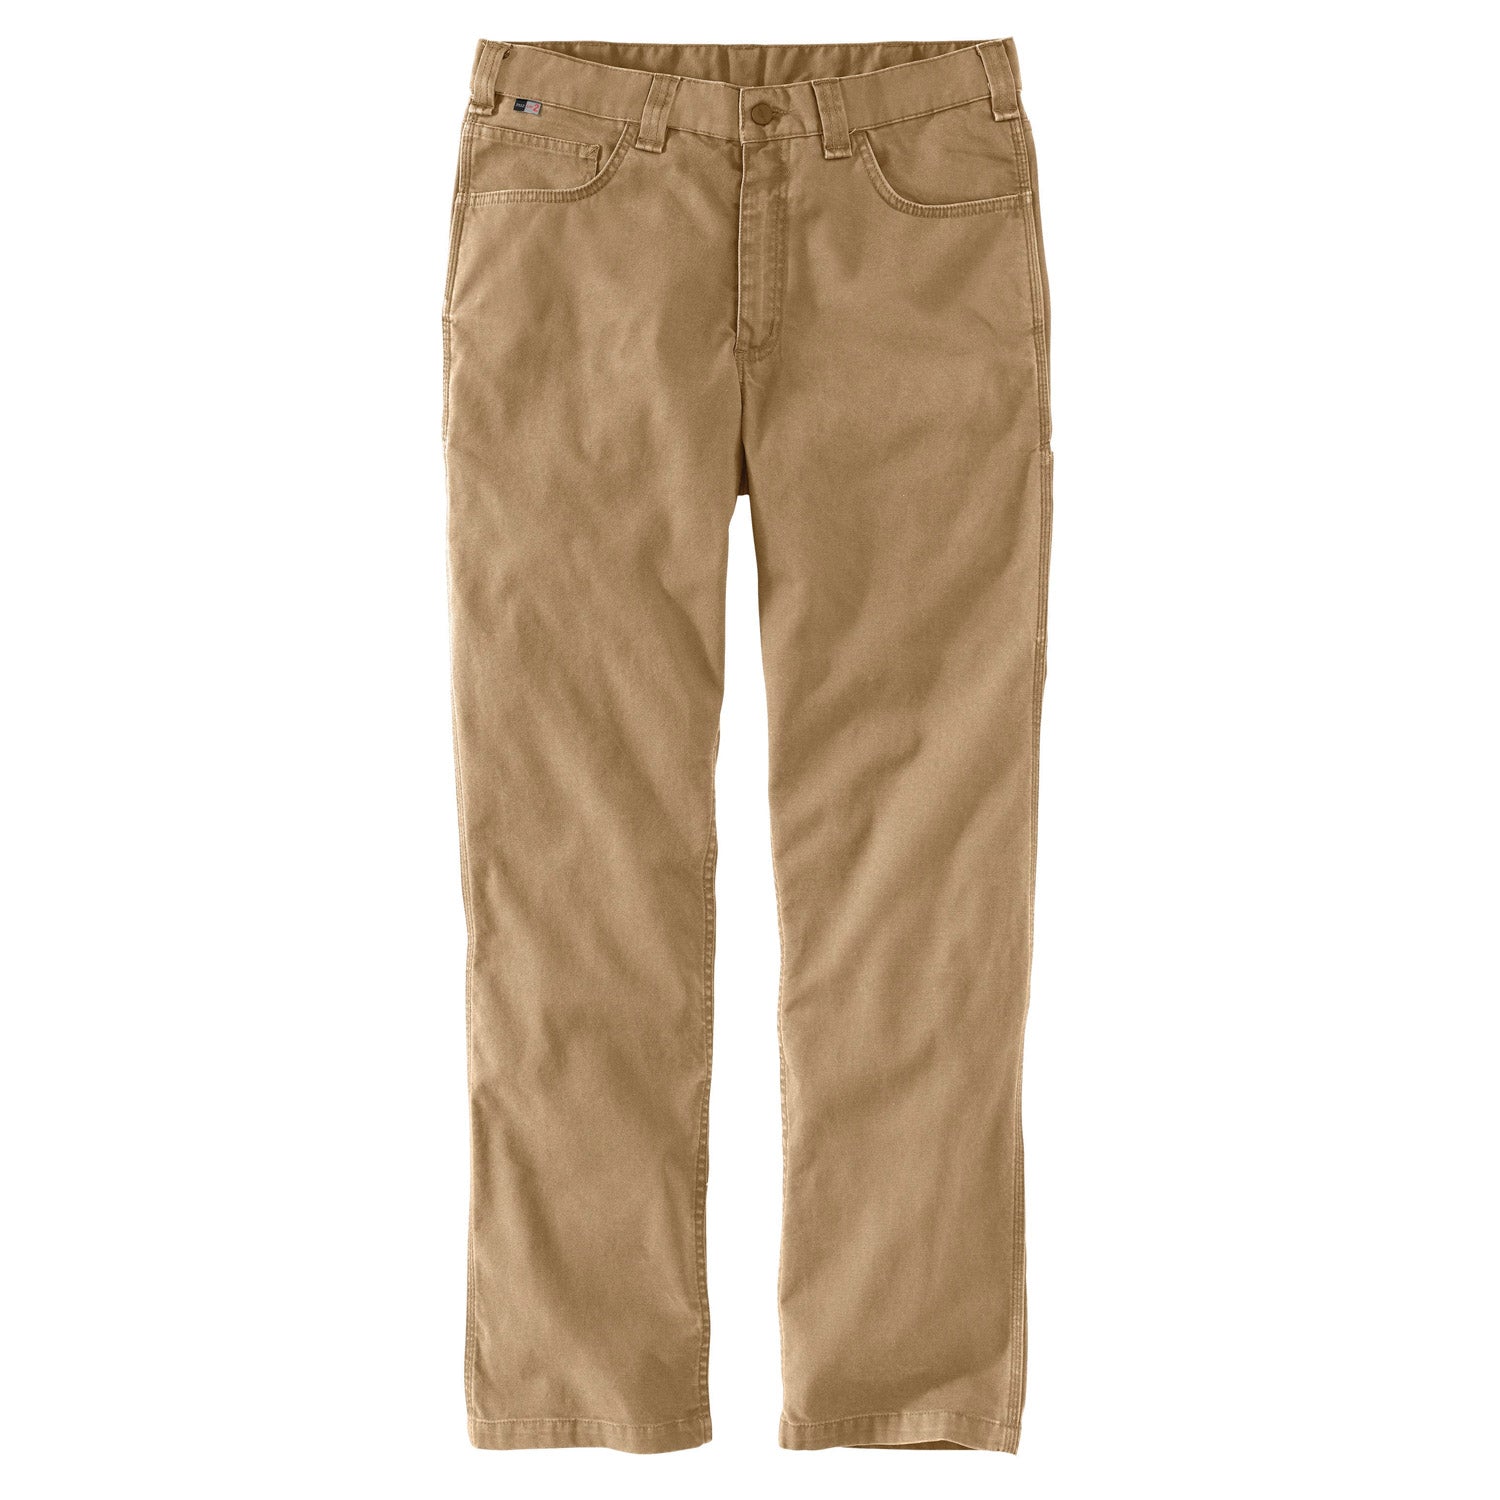 Carhartt Men's Flame Resistant Rugged Flex® Relaxed Fit Canvas Pant_Dark Khaki - Work World - Workwear, Work Boots, Safety Gear